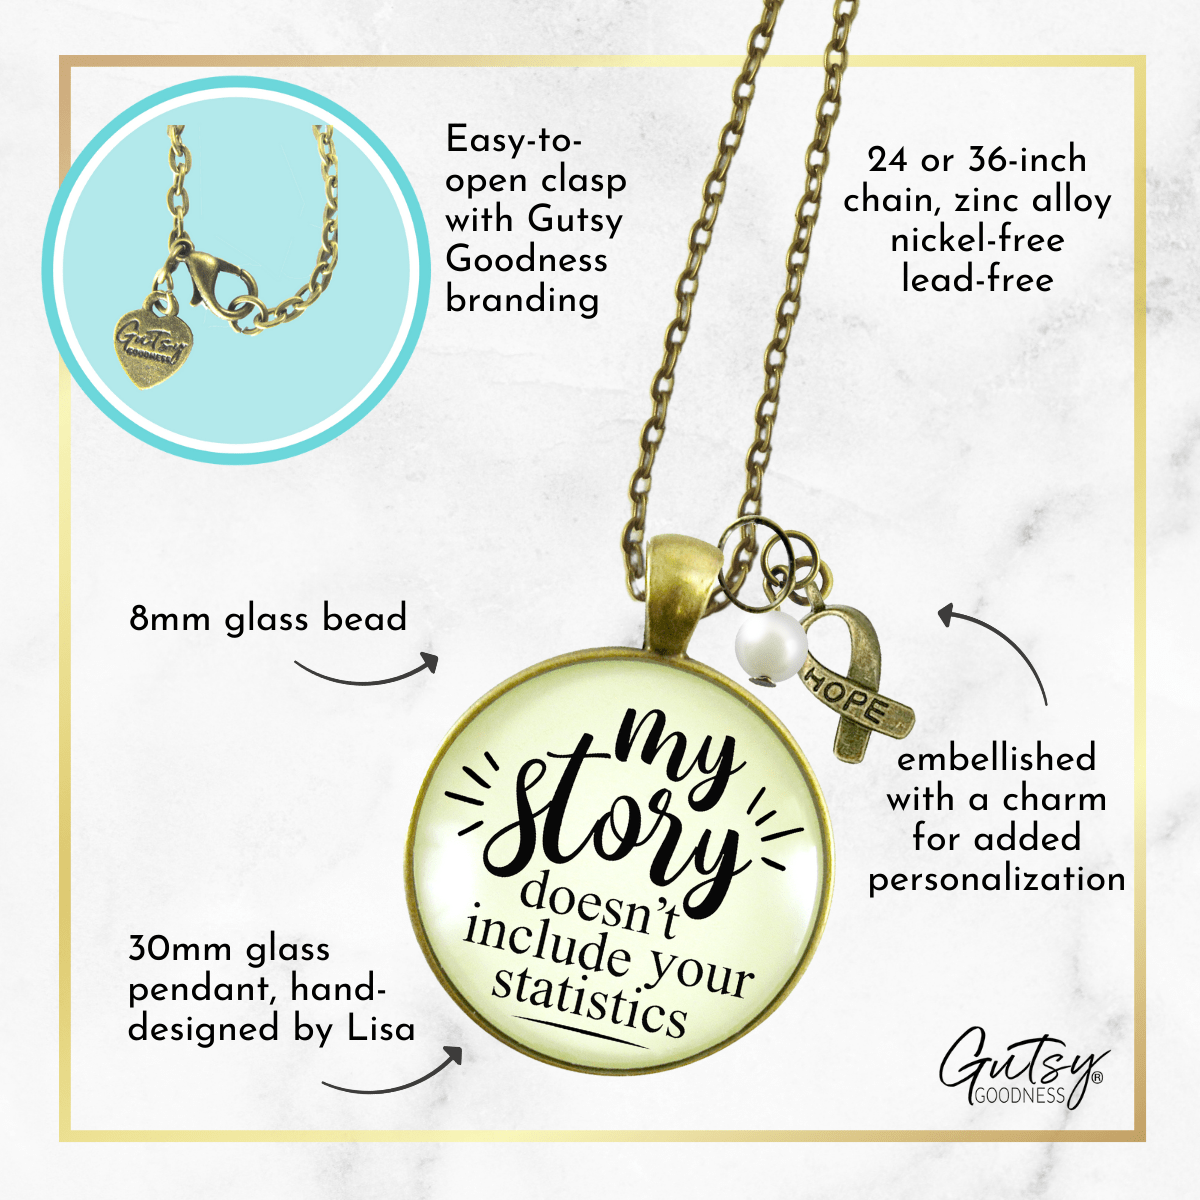 Gutsy Goodness Survivor Necklace My Story Doesn't Include Statistics Funny Jewelry - Gutsy Goodness;Survivor Necklace My Story Doesn't Include Statistics Funny Jewelry - Gutsy Goodness Handmade Jewelry Gifts